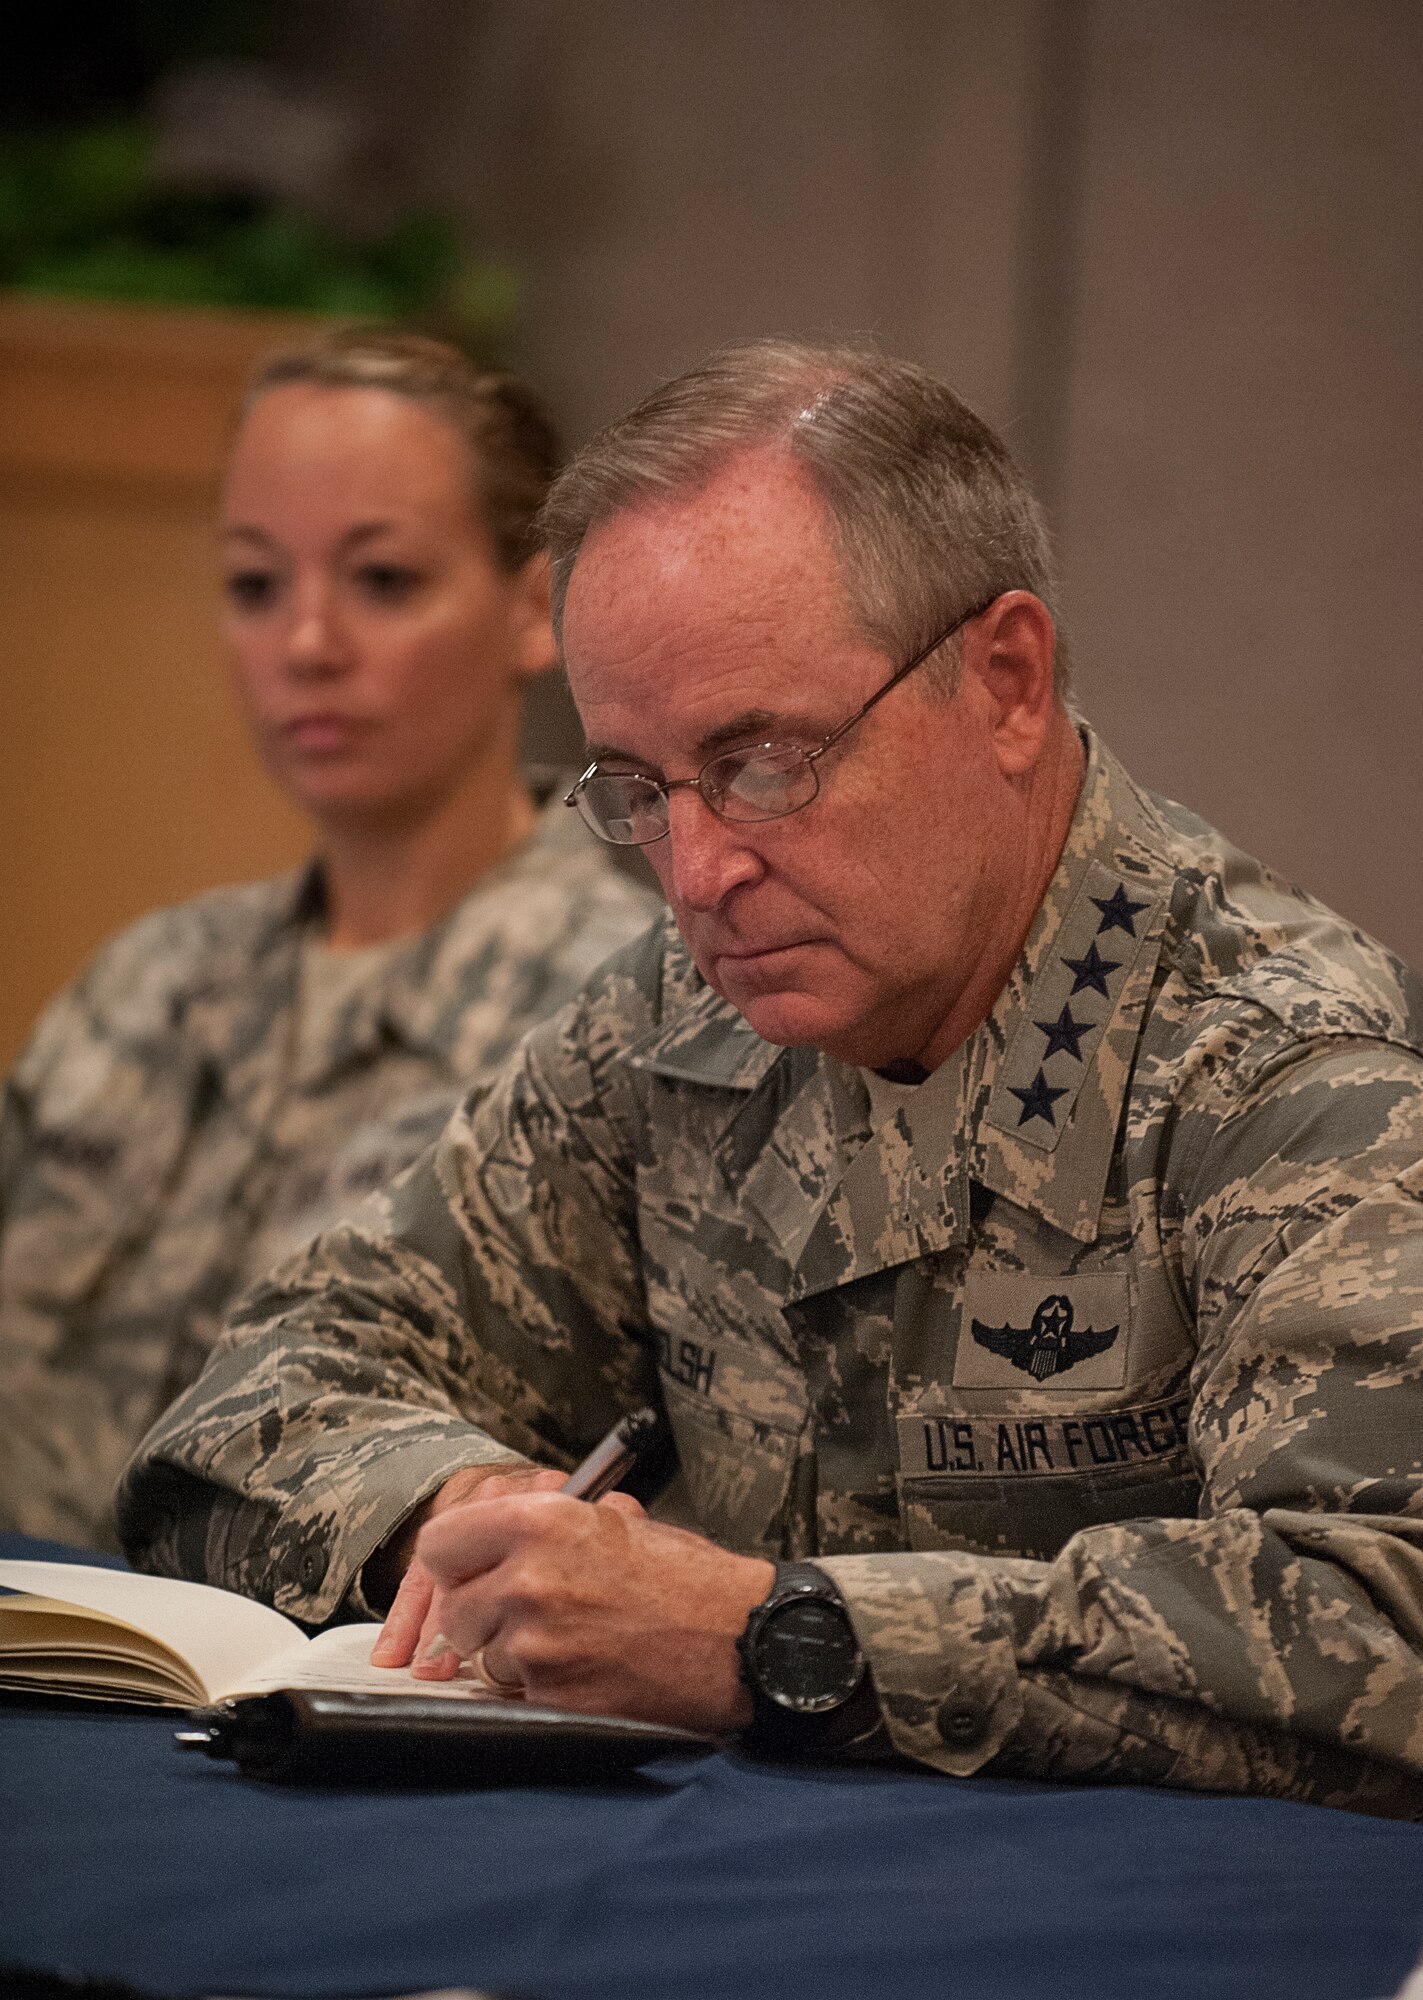 Air Force Chief of Staff Gen. Mark A. Welsh III writes down questions posed by Airmen during a visit to the 5th Bomb Wing and 91st Missile Wing at Minot Air Force Base, N.D., Aug. 5, 2015. Welsh is the 20th Chief of Staff of the U.S. Air Force and serves as the senior uniformed Air Force officer responsible for the organization, training and equipping of 664,000 active-duty, guard, reserve and civilian forces serving in the United States and overseas. (U.S. Air Force photo/Senior Airman Stephanie Morris)